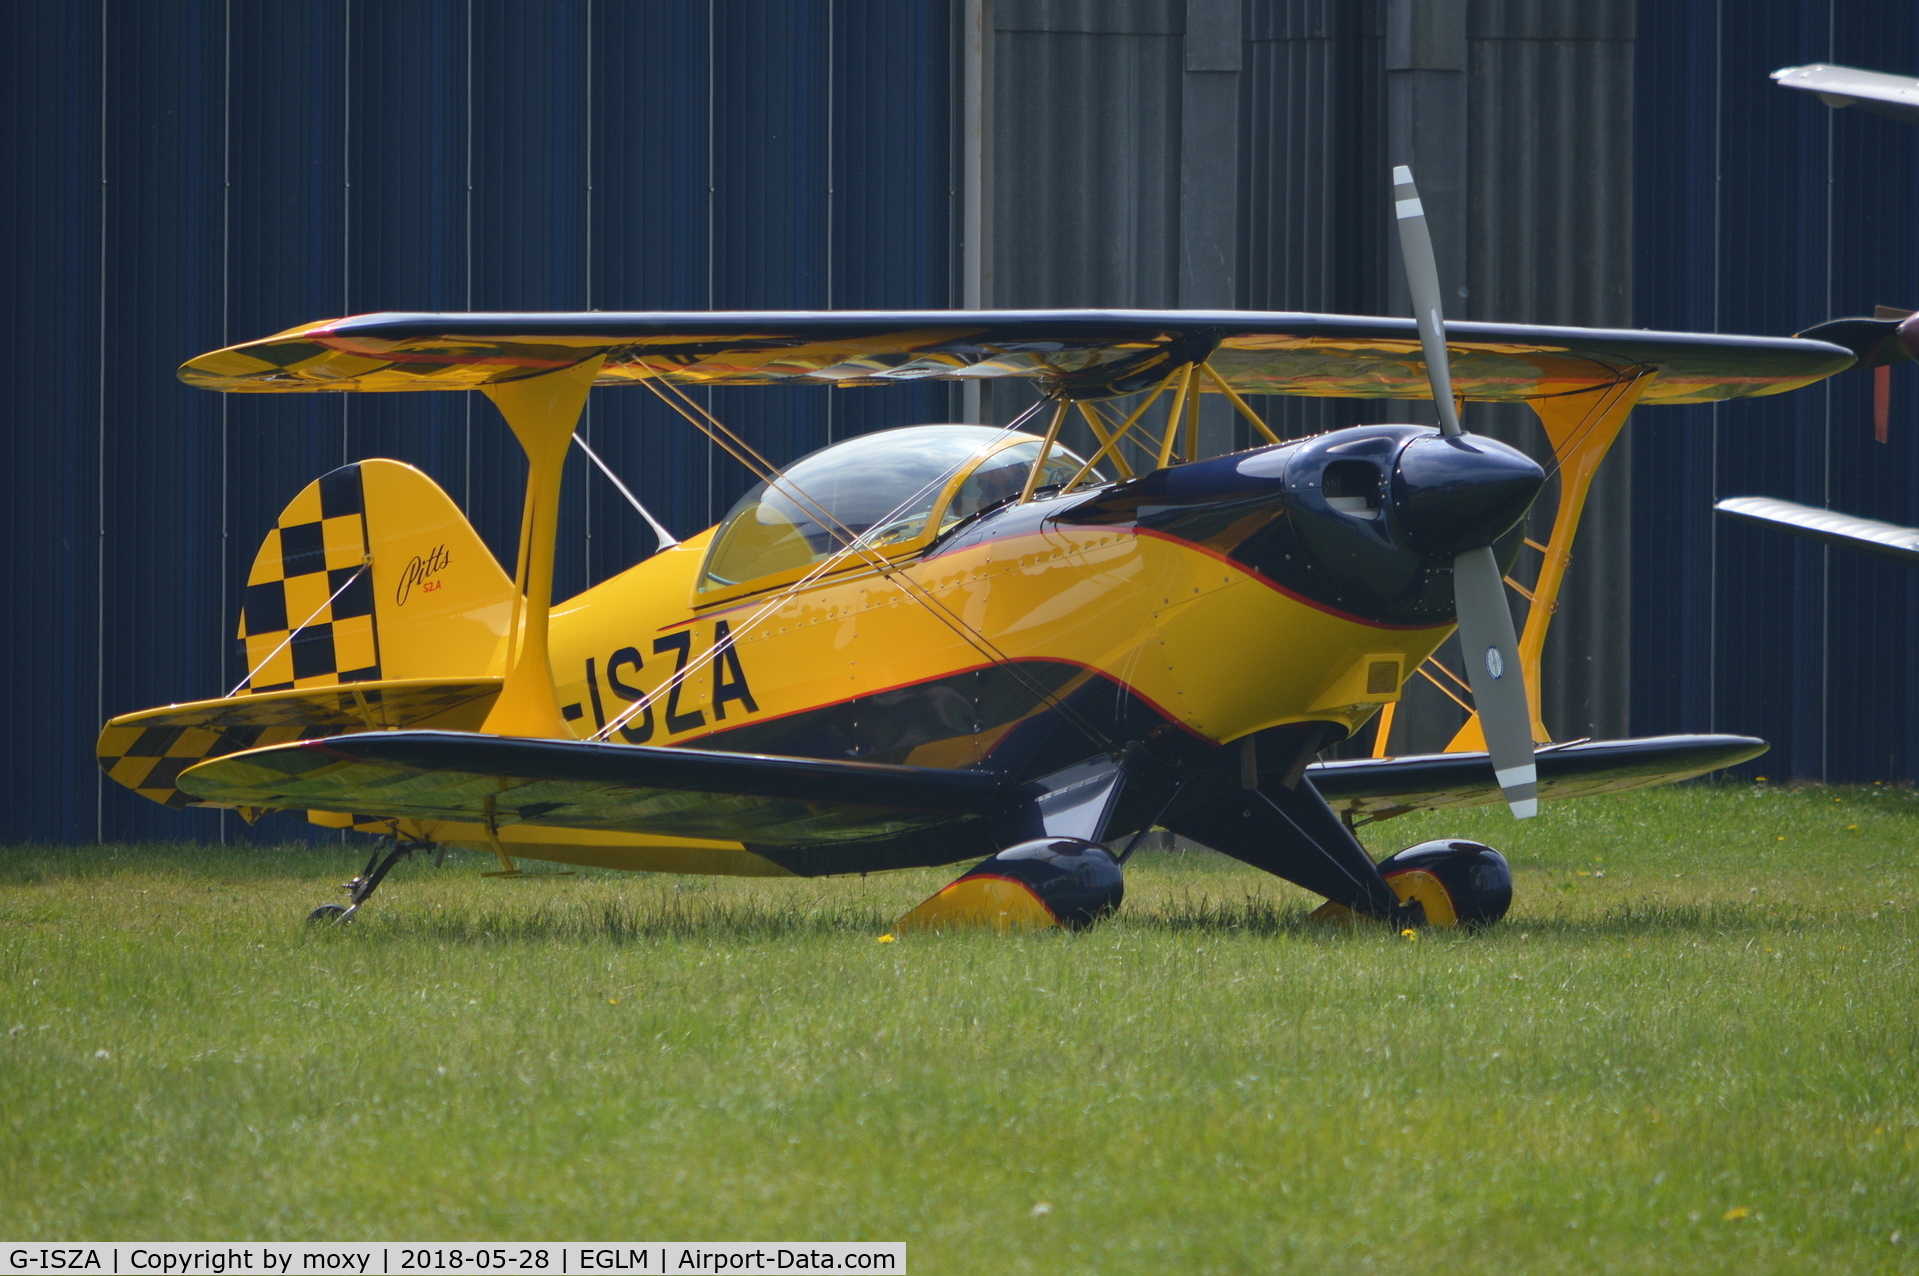 G-ISZA, 1977 Aerotek Pitts S-2A Special C/N 2137, Aerotek Pitts S-2A at White Waltham.